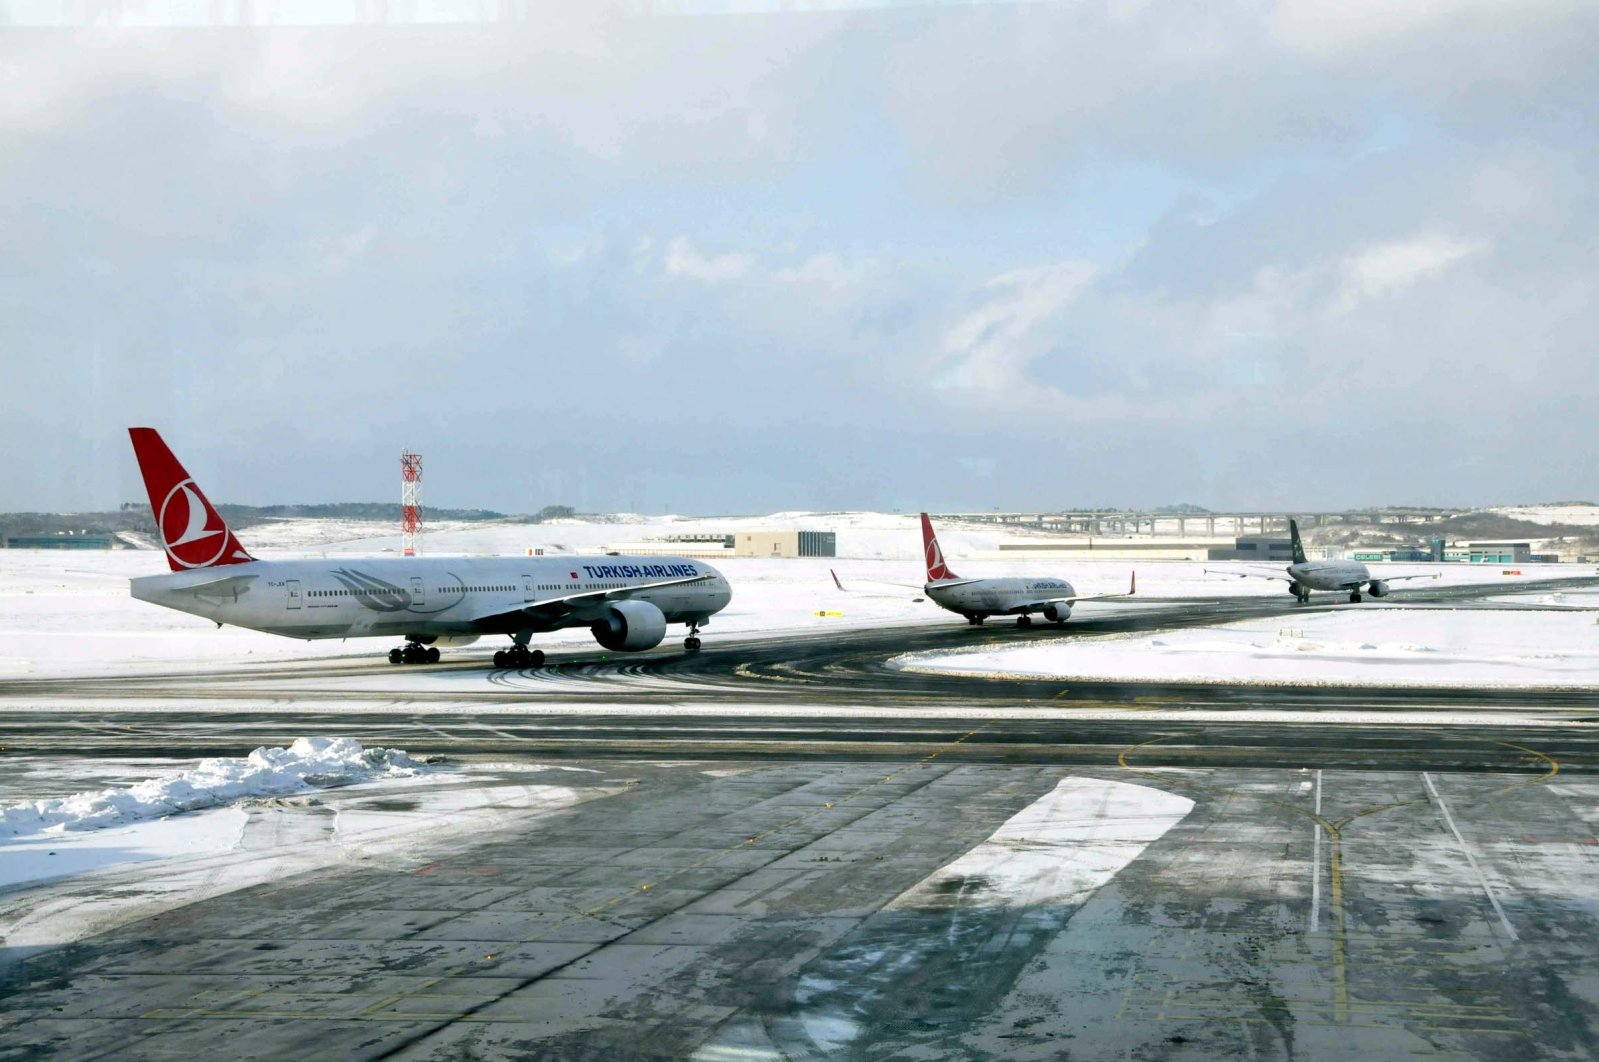 Turkish Airlines planes are seen at Istanbul Airport, Jan. 24, 2022. (DHA Photo)